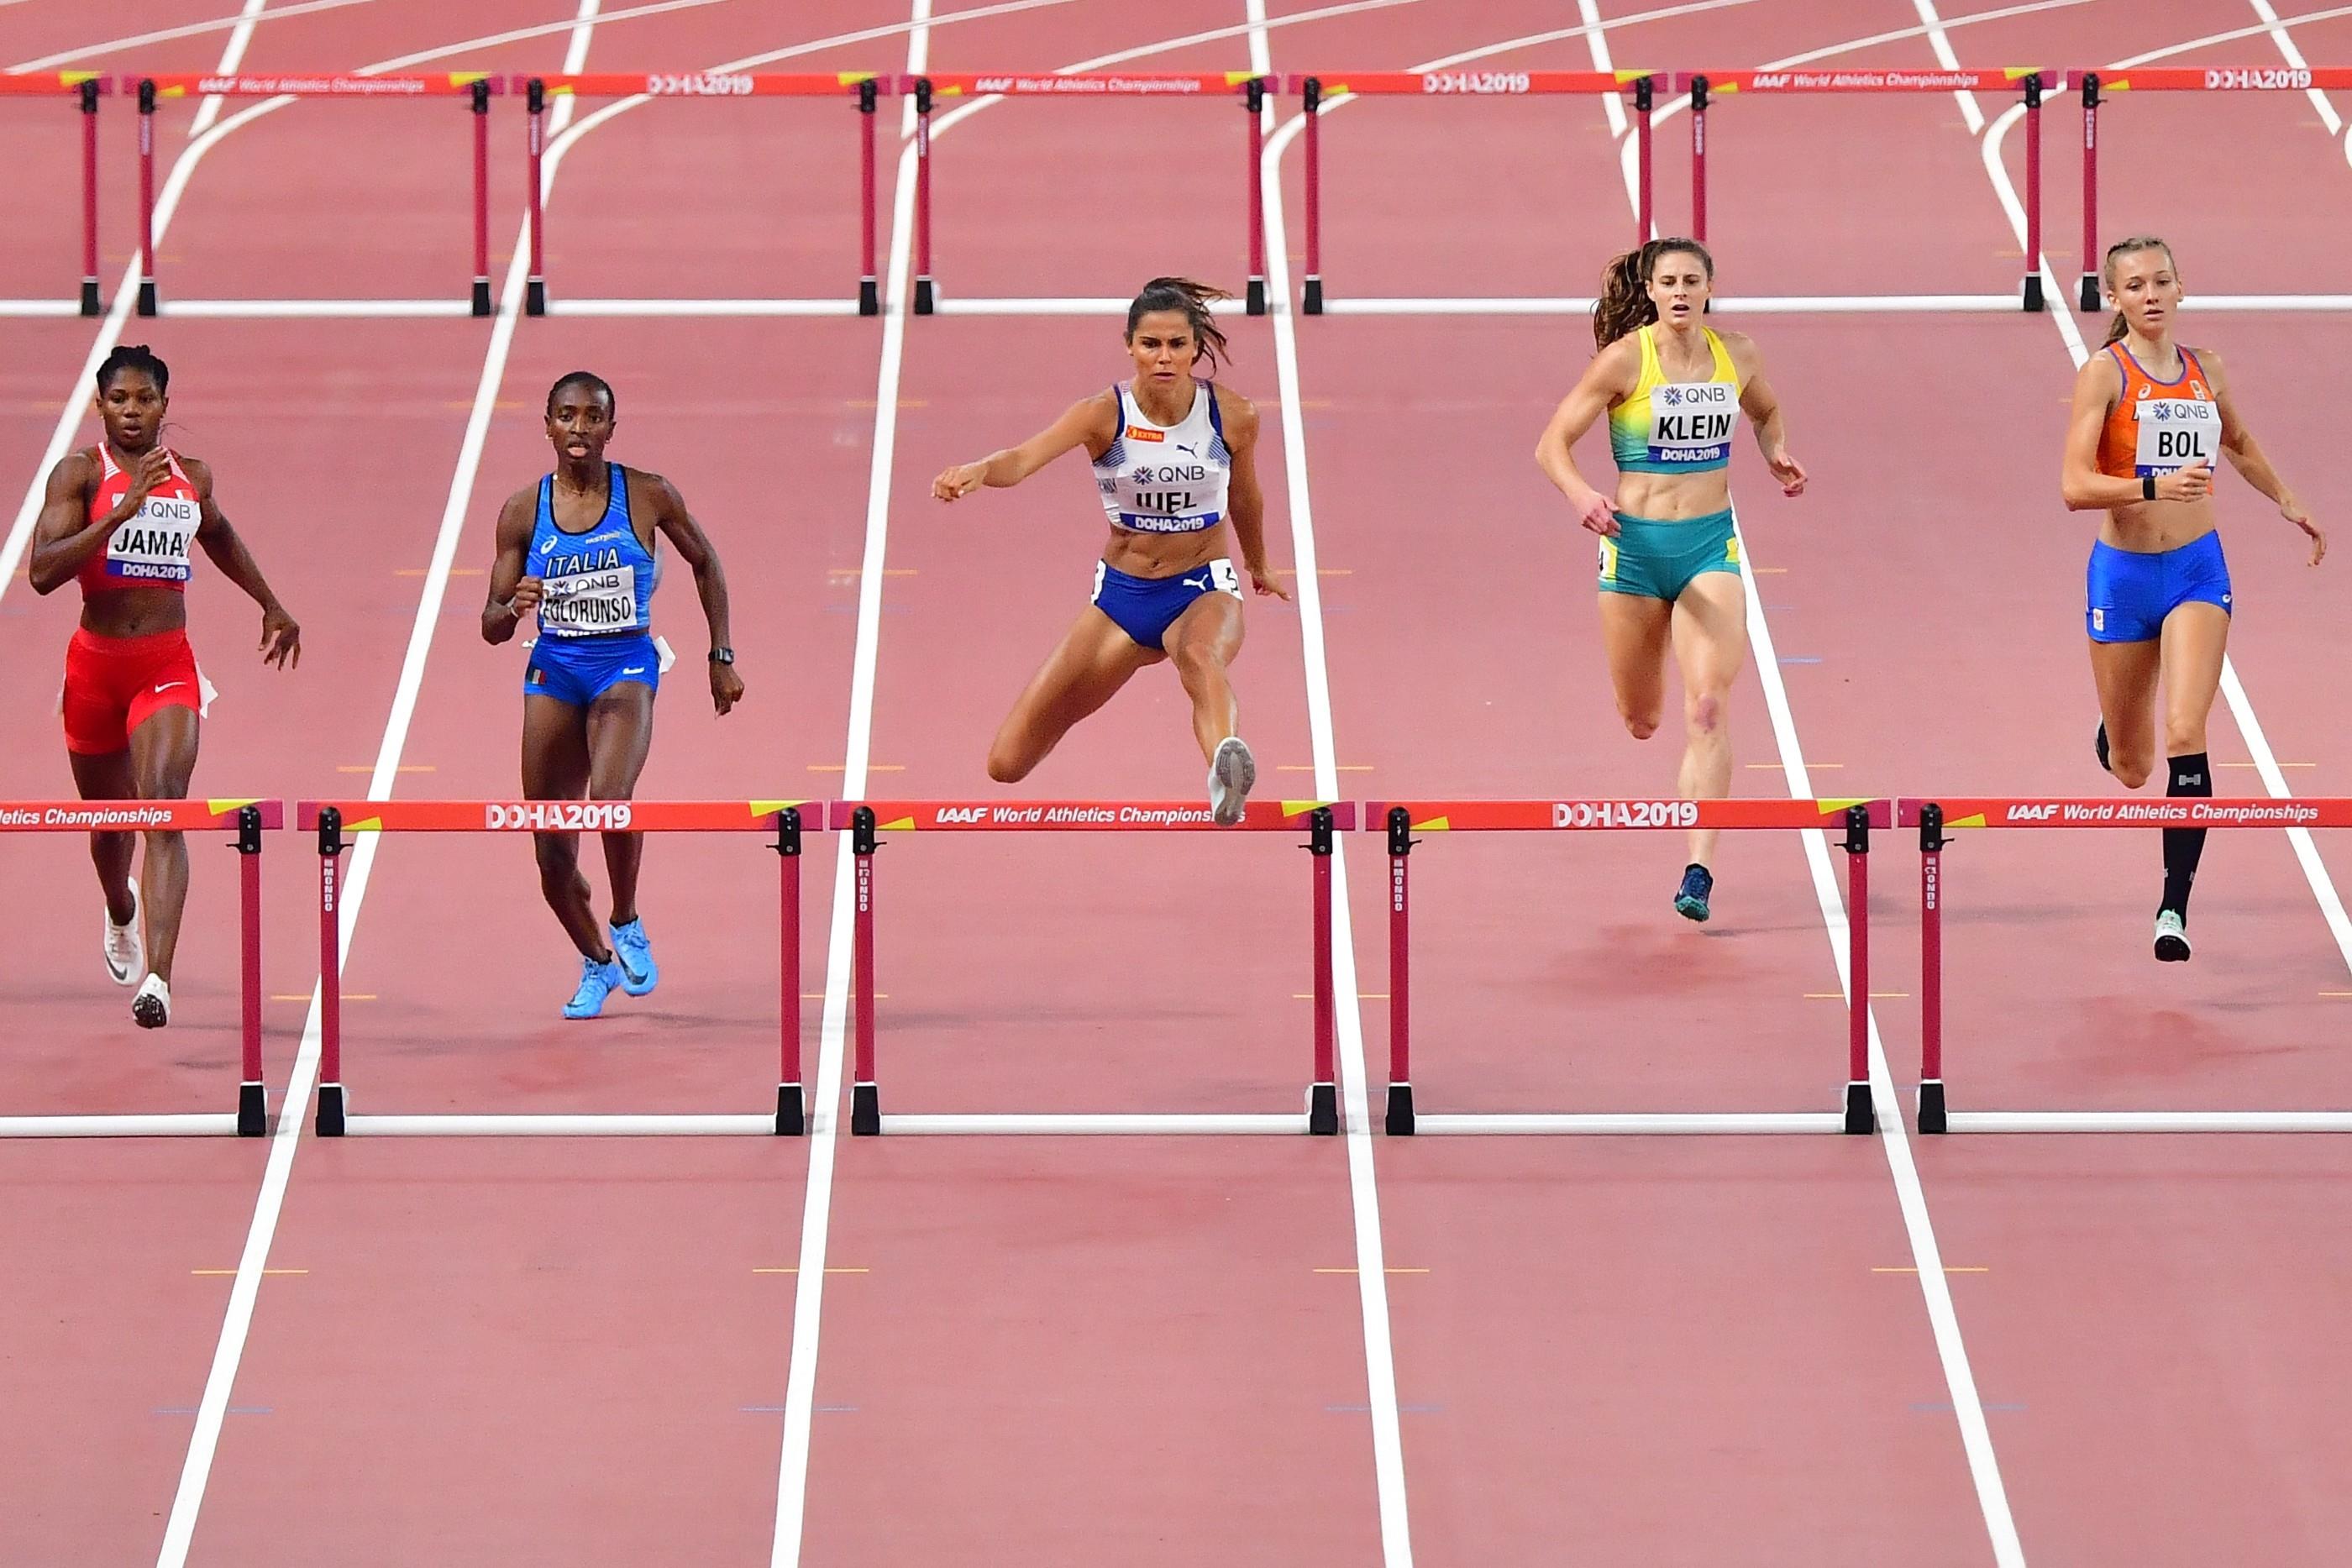 Women's 400m hurdles heats at the World Championships Doha 2019 (AFP / Getty Images)